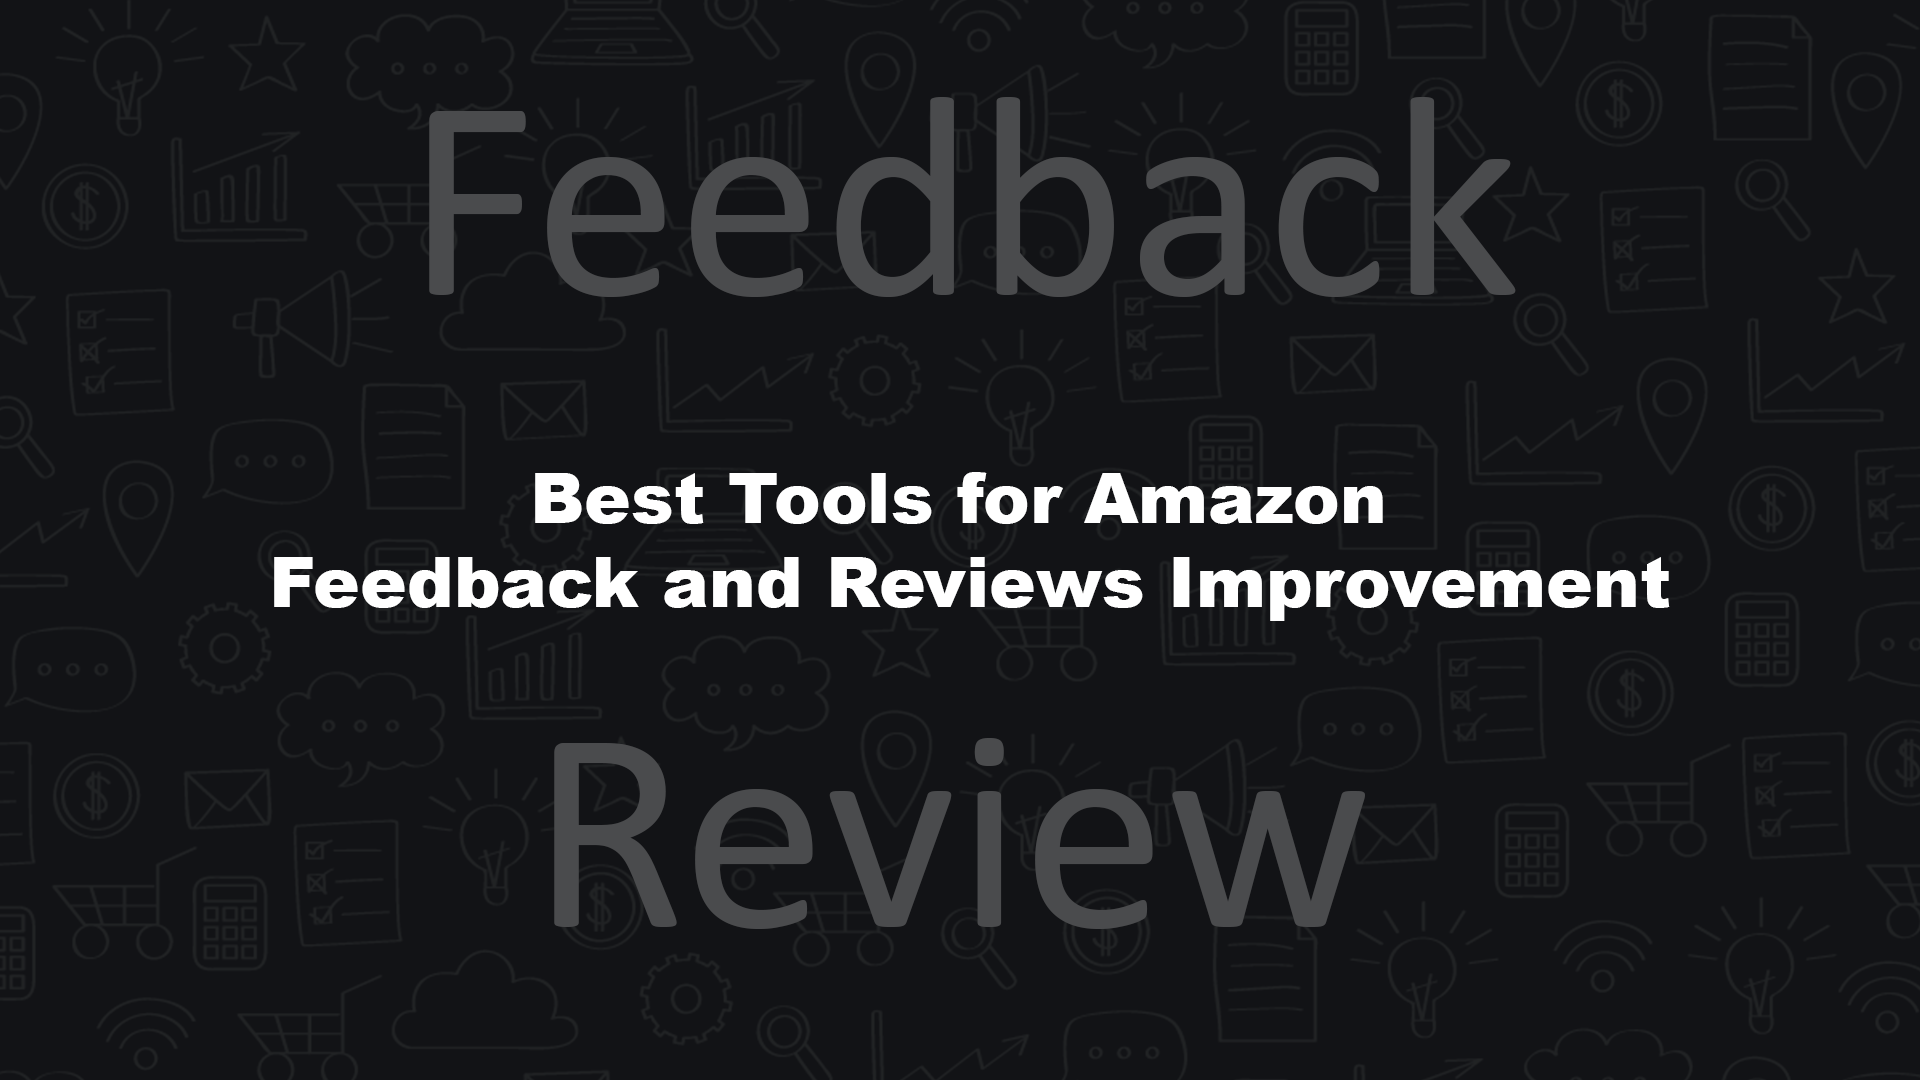 Best Tools for Amazon Feedback and Reviews Improvement